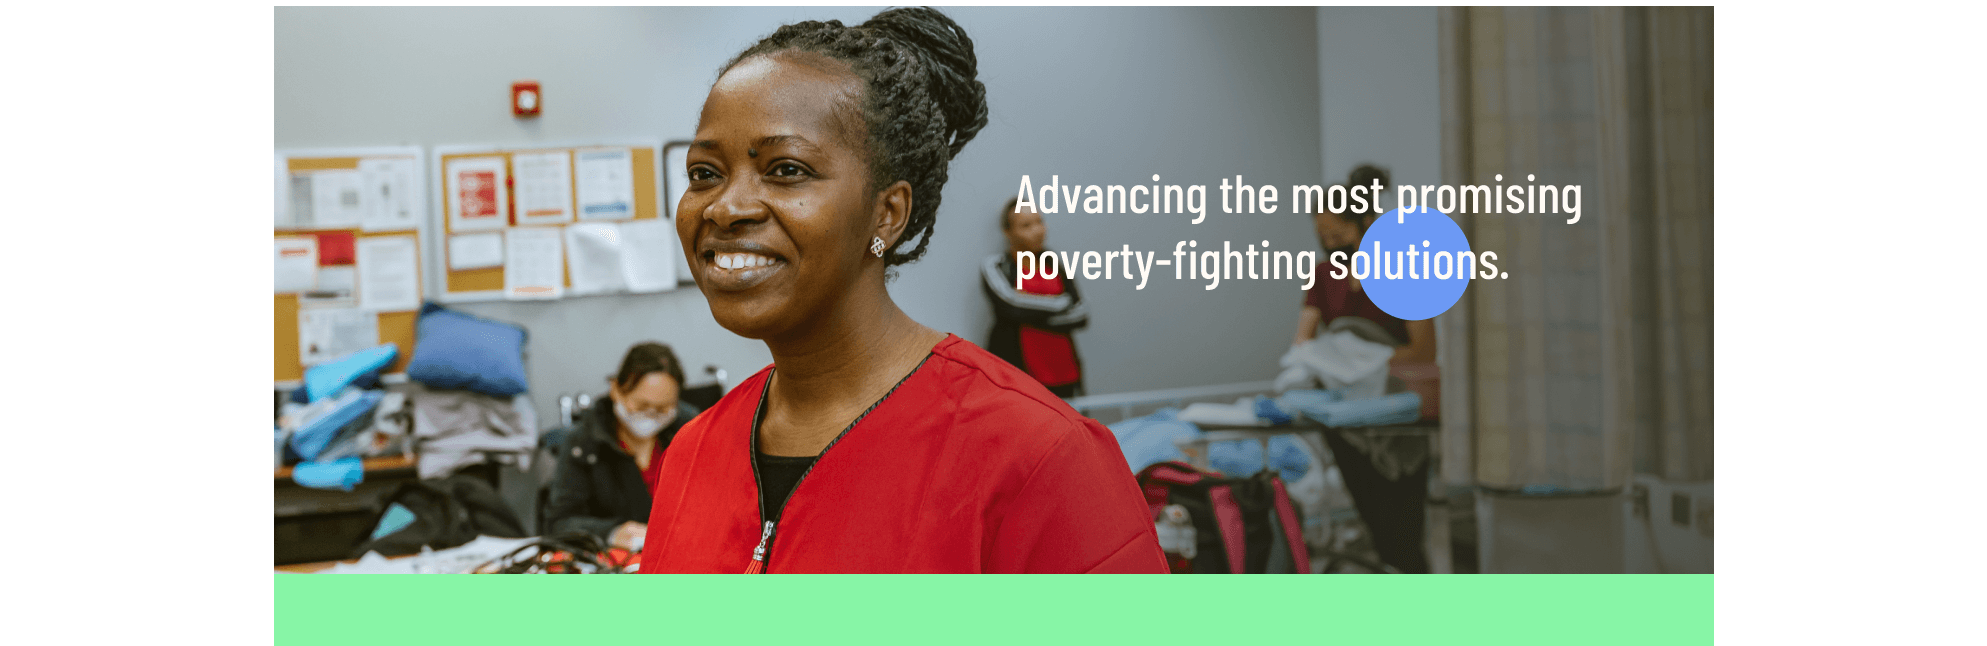 Advancing the most promising poverty-fight solutions